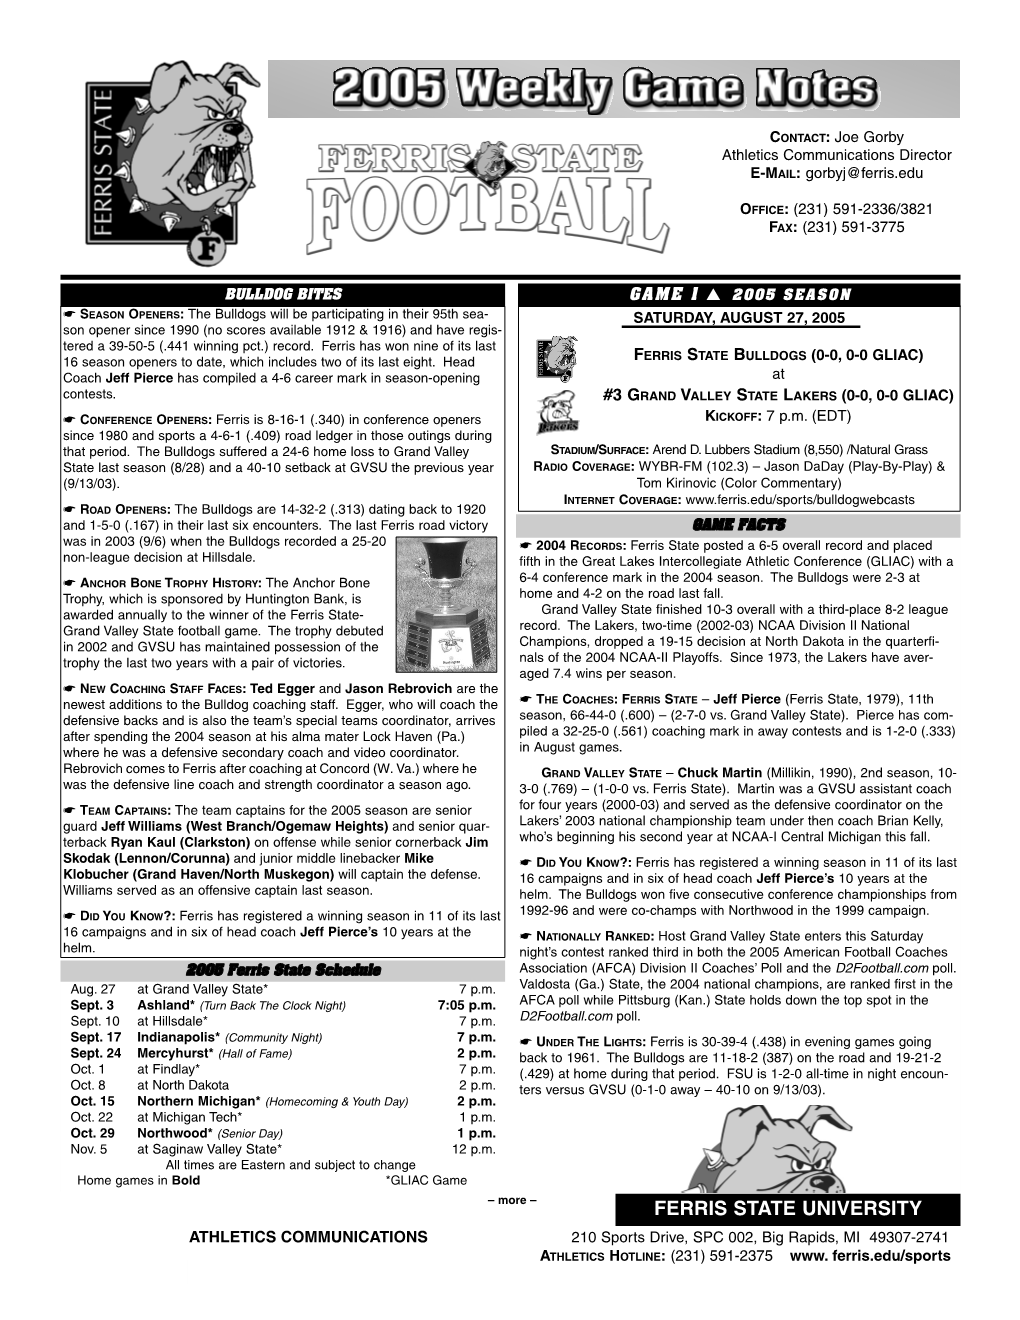 2005 Grand Valley State Football Release.Qxd